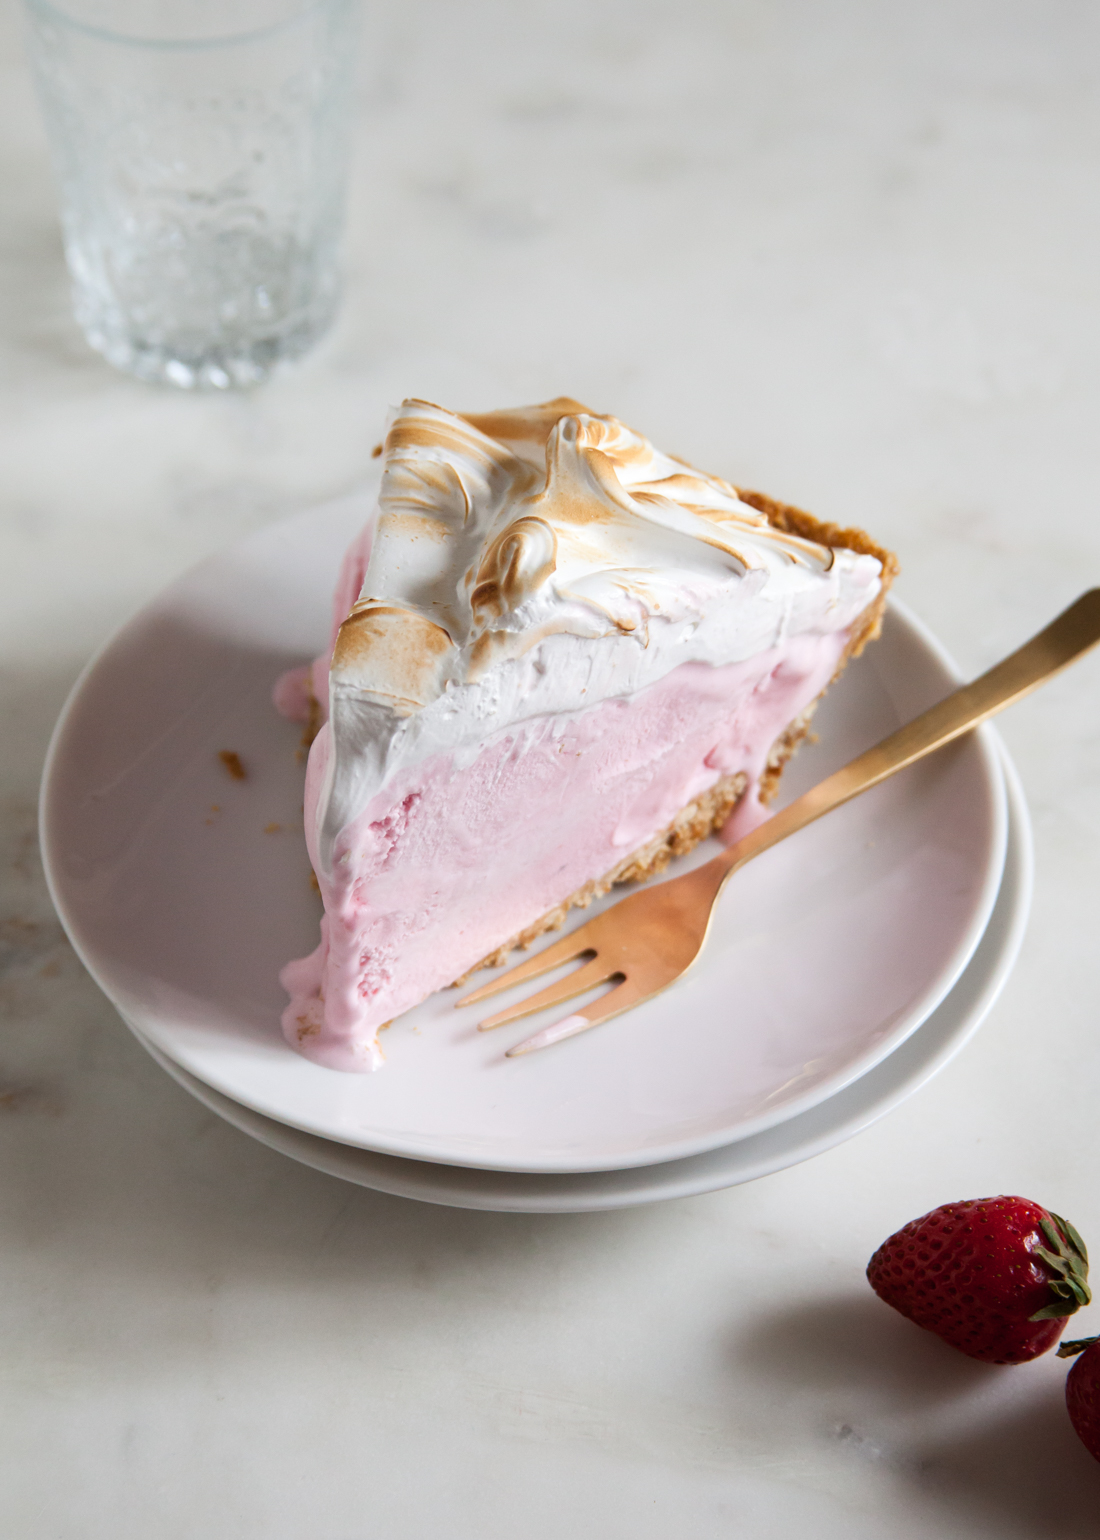 Baked Alaska Ice Cream Pie with a pretzel crusted and toasted meringue topping.